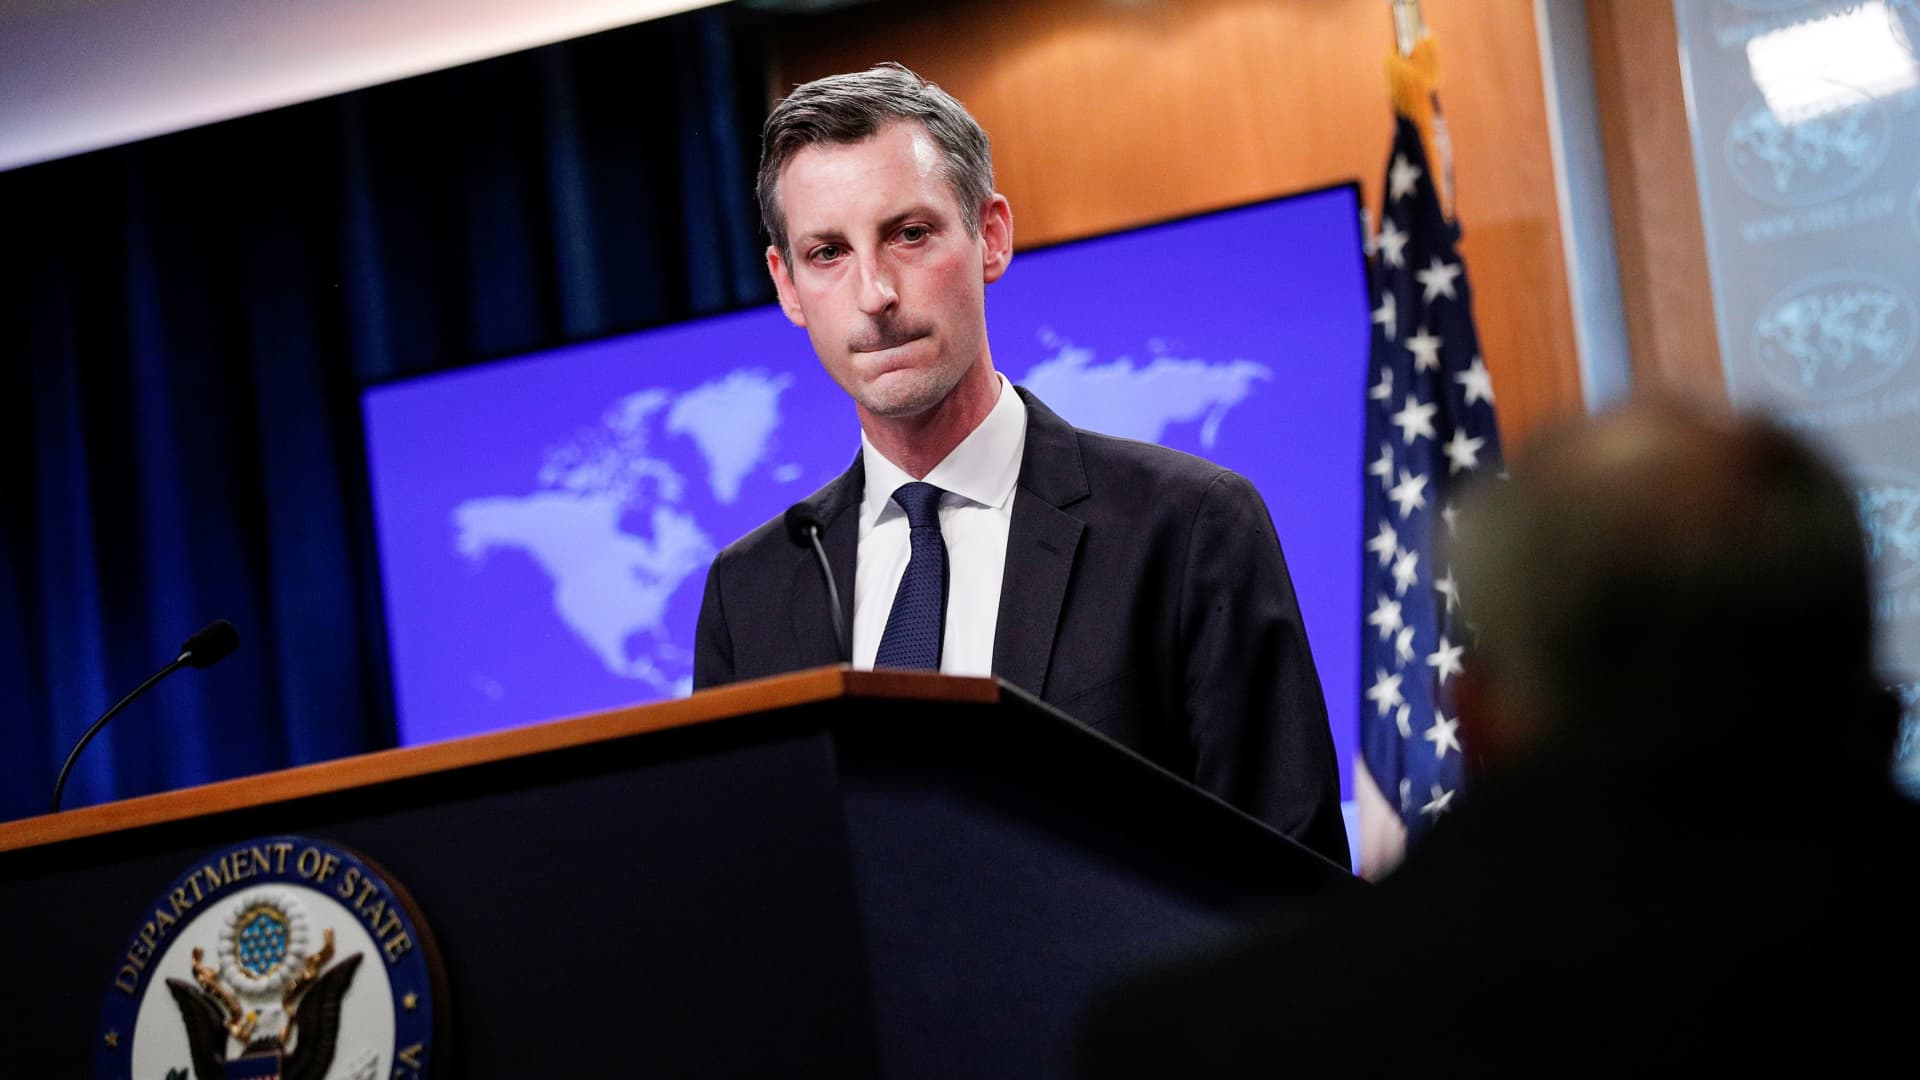 U.S. State Department Spokesman Ned Price faces reporters during a news briefing at the State Department in Washington, March 1, 2021.